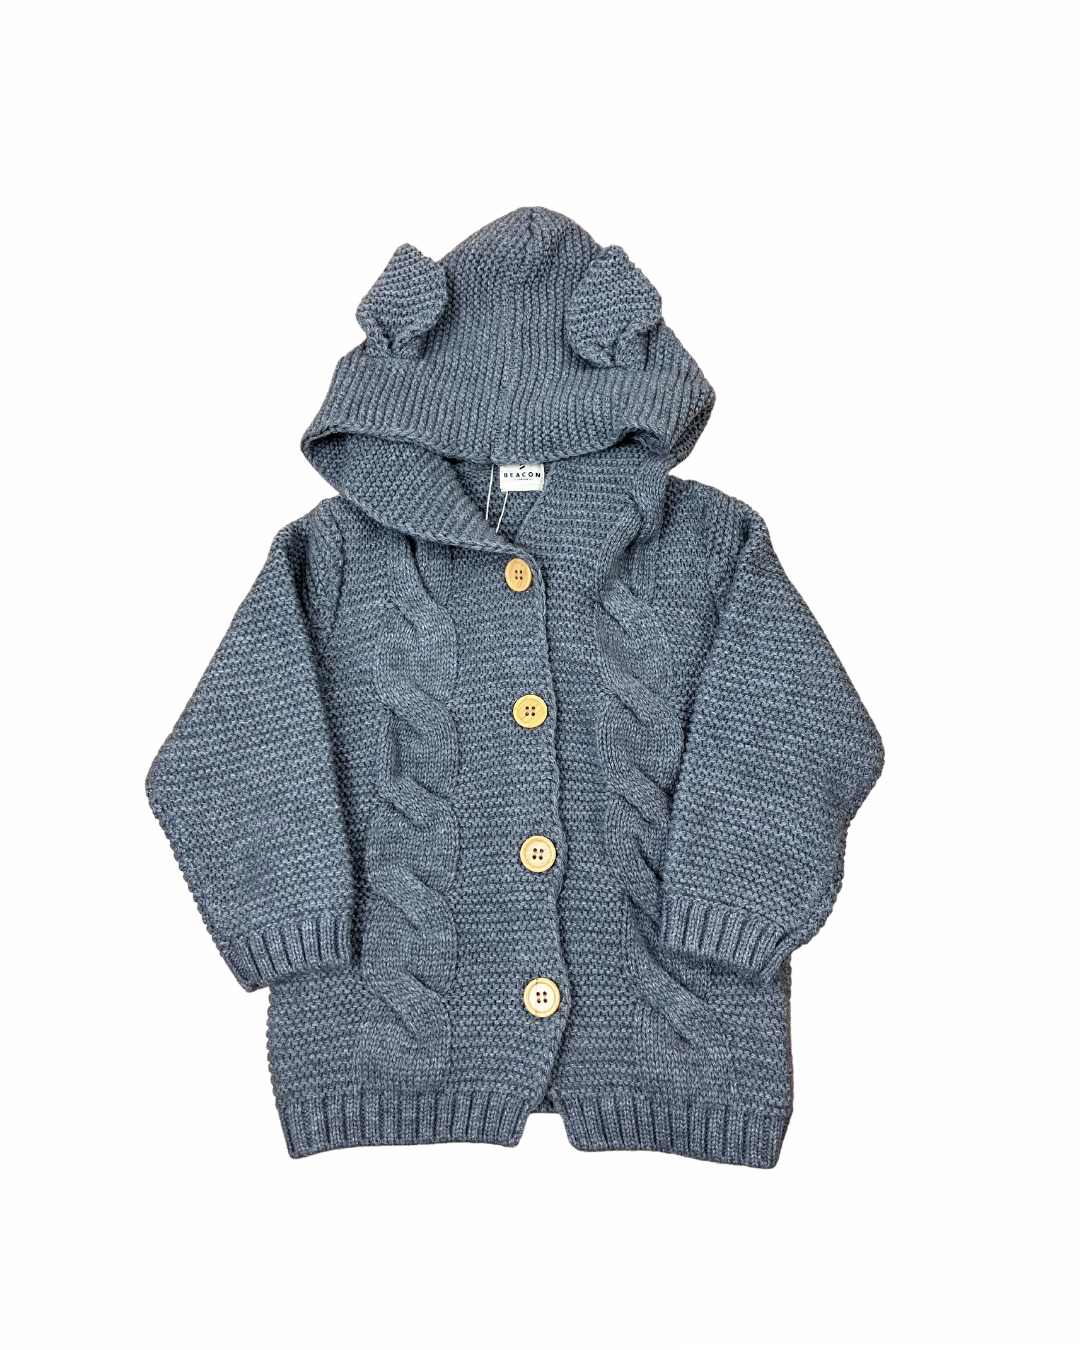 Knitted & Hooded Cardigan-Cardigans-Beacon London-Slate Grey-0-3 Months-Beacon London